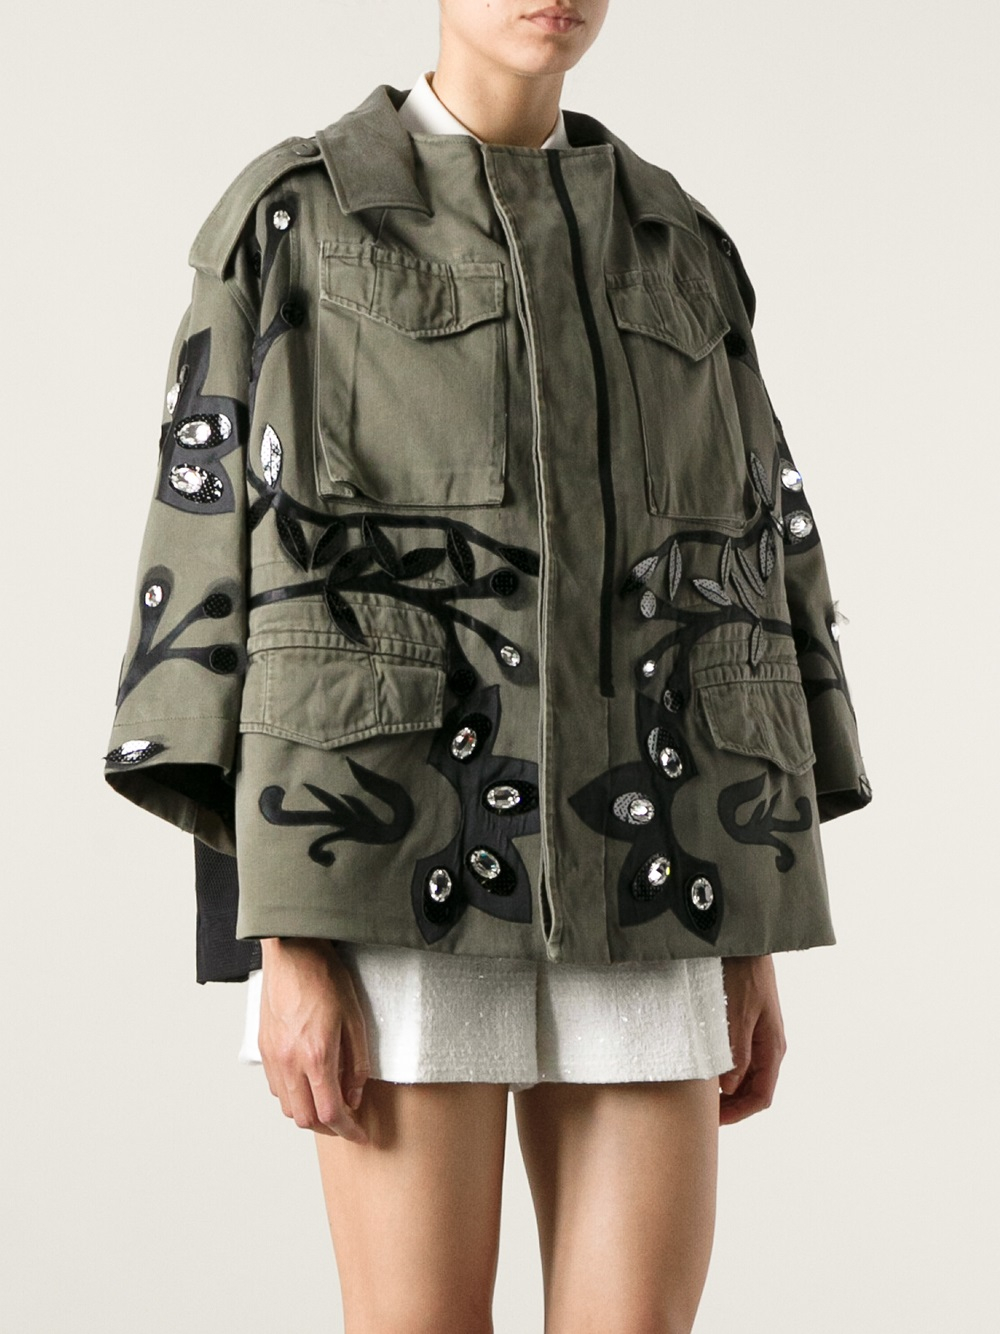 Antonio Marras Embellished Military Jacket in Green (Natural) - Lyst